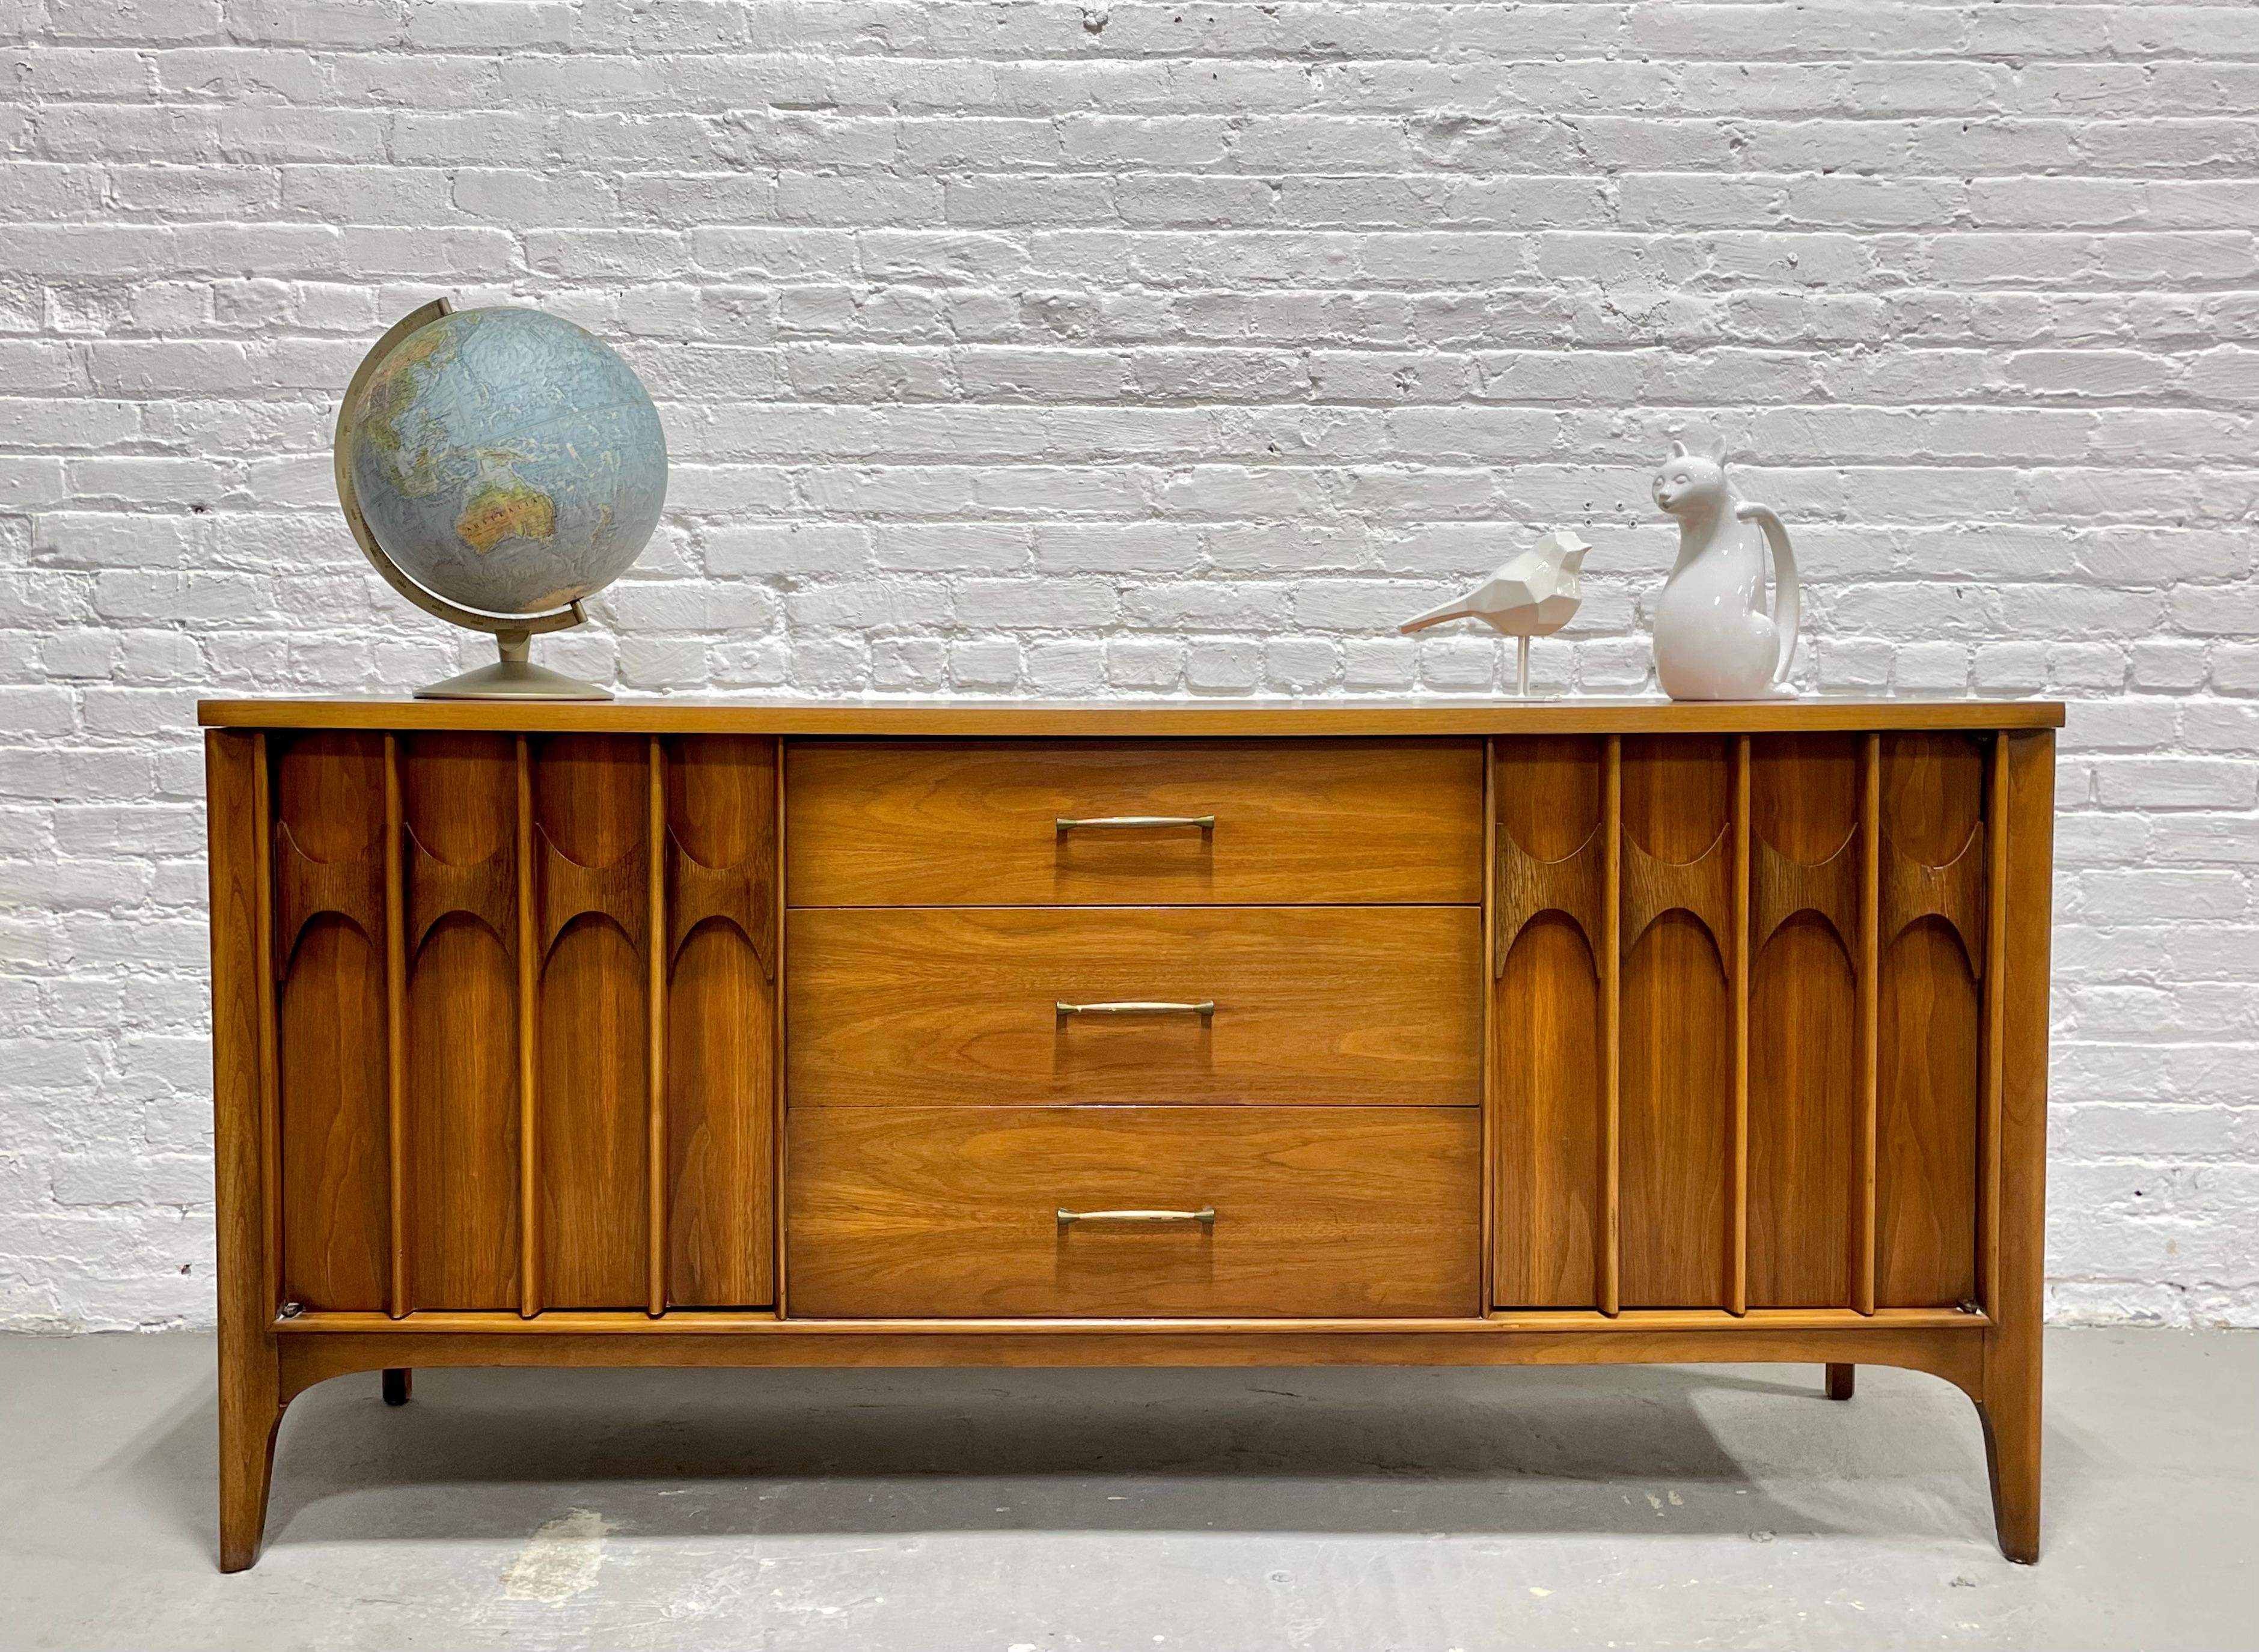 SCULPTED Mid Century MODERN CREDENZA / Long Dresser by Kent Coffey Perspecta, c. 7